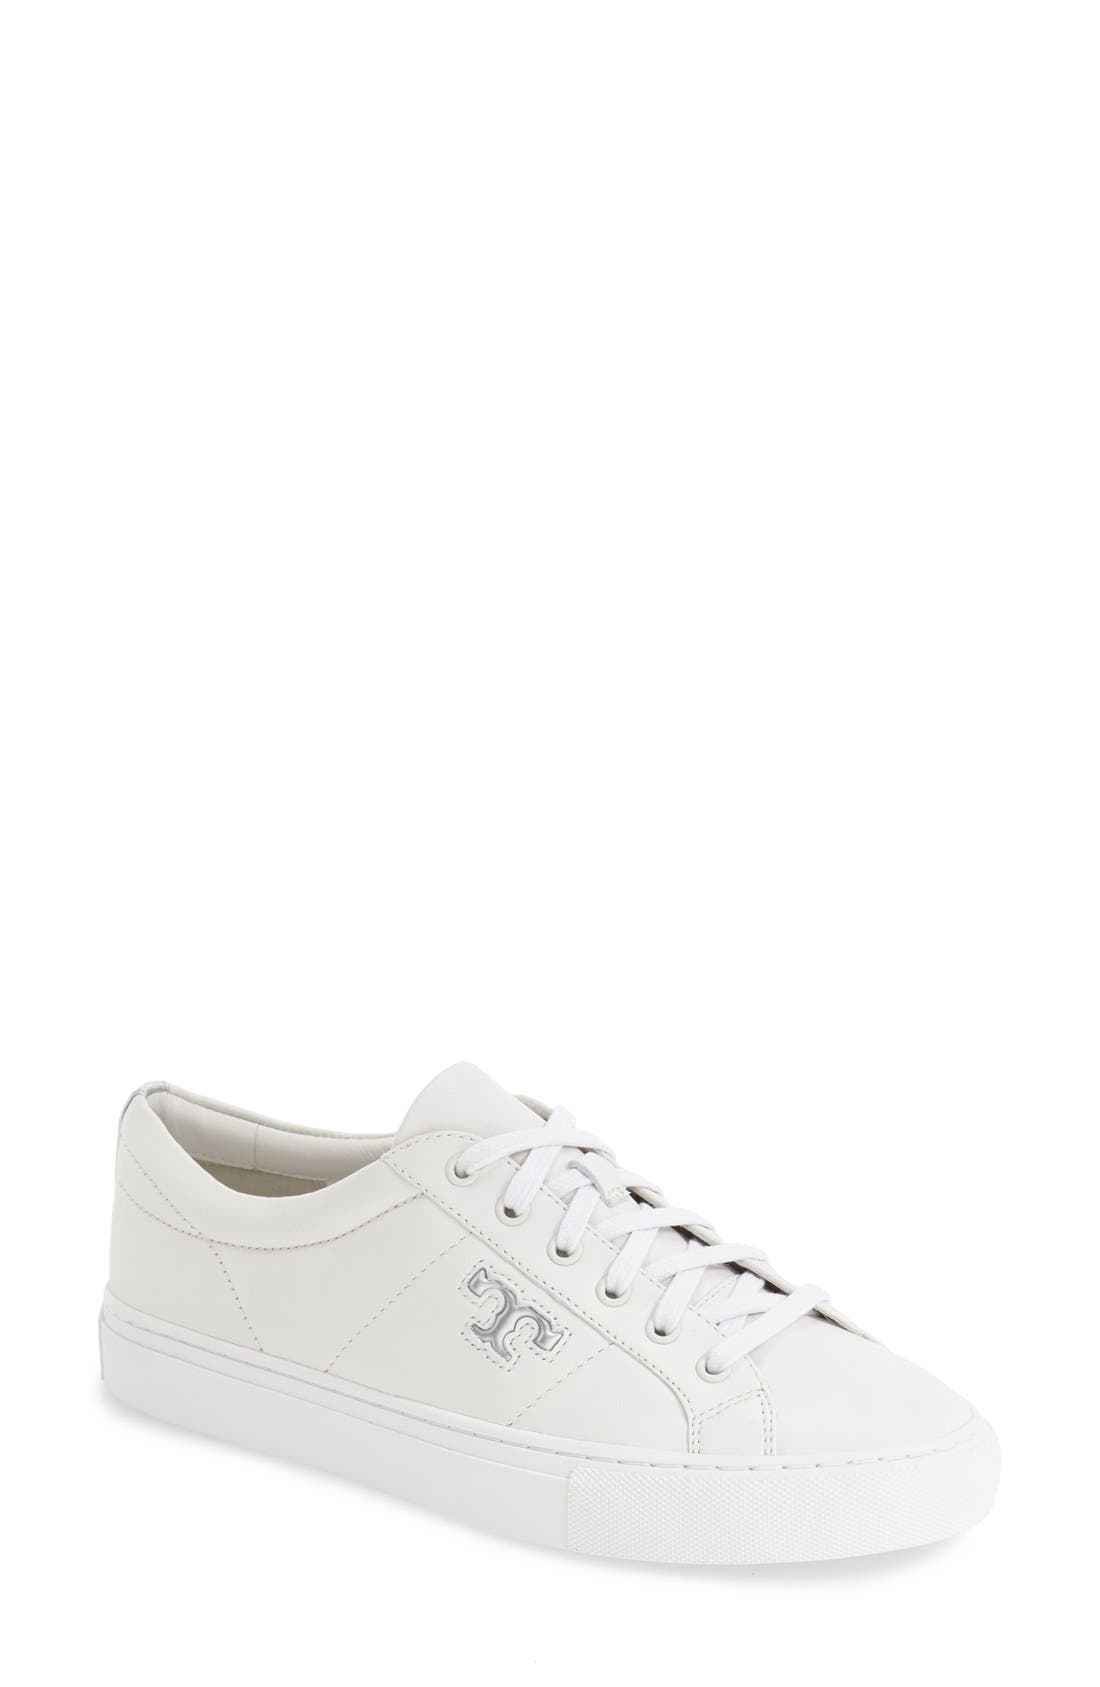 tory burch sneakers white